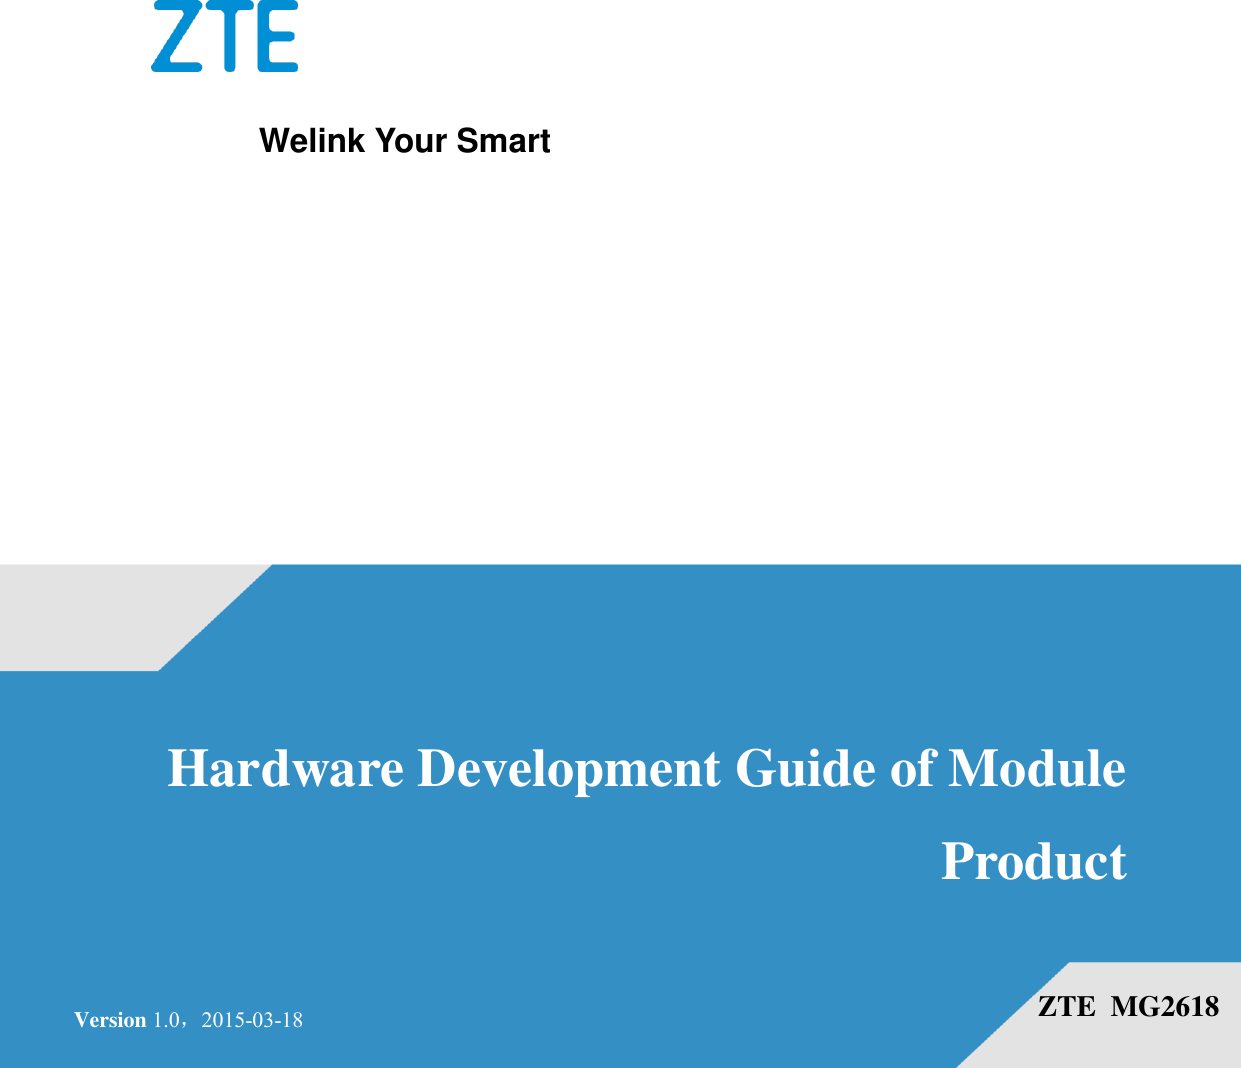                Hardware Development Guide of Module Product  ZTE  MG2618 Version 1.0，2015-03-18 Welink Your Smart 